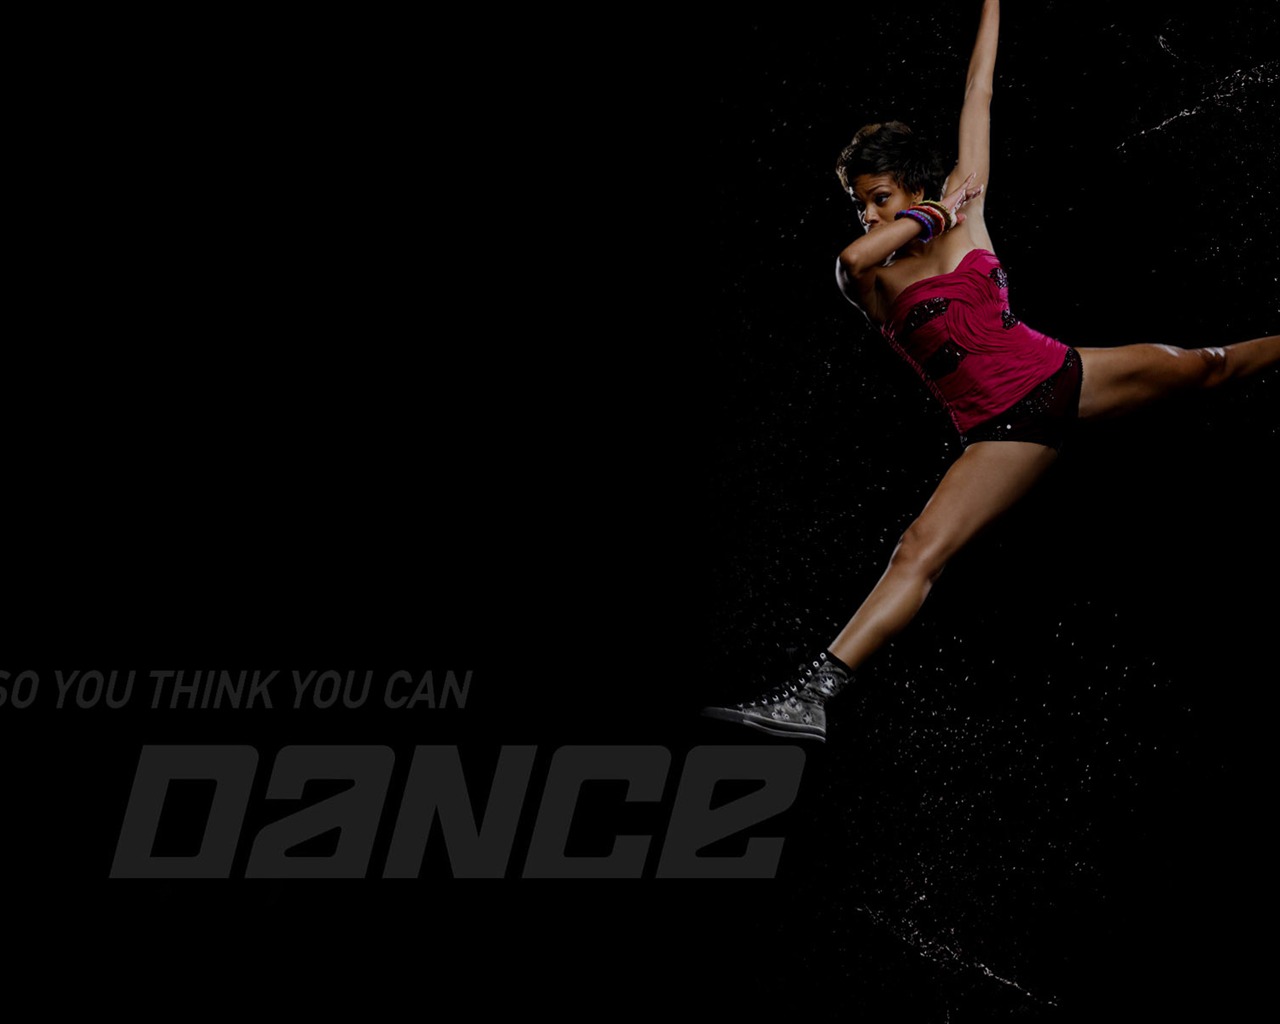 So You Think You Can Dance 舞林争霸 壁纸(二)15 - 1280x1024